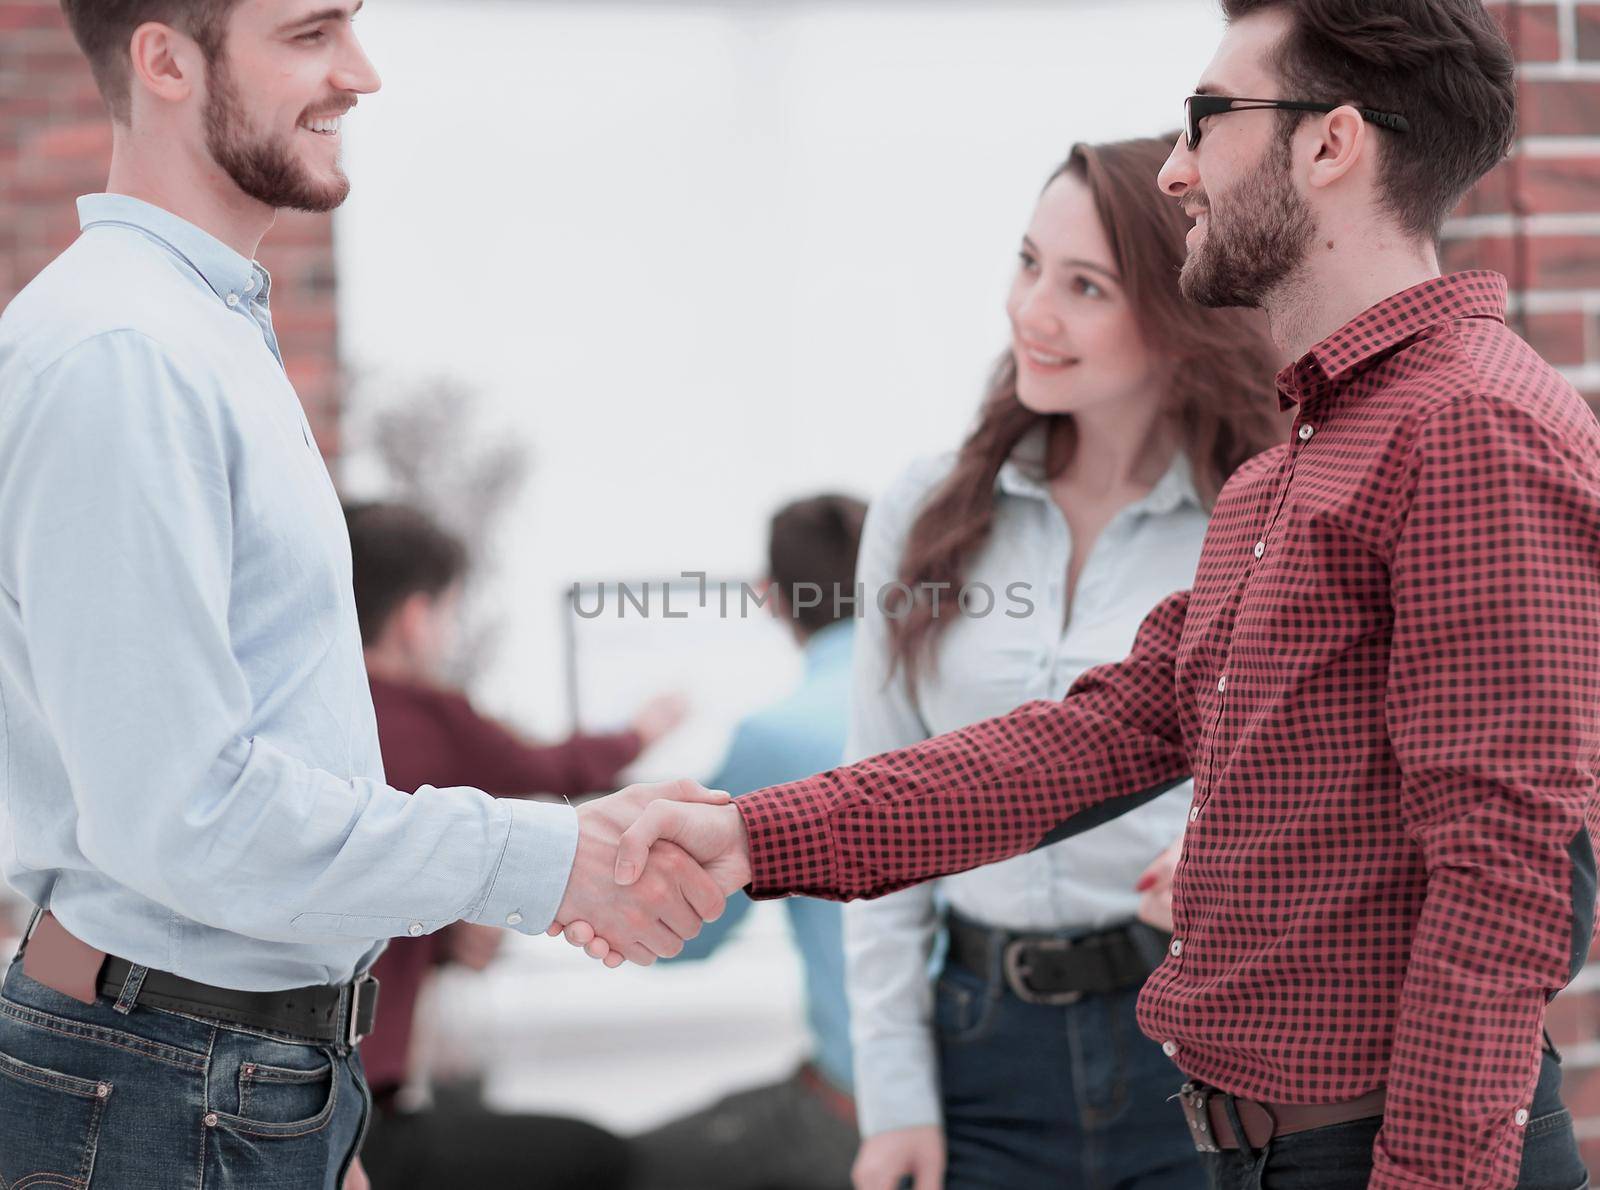 Closeup image of business partners making handshake in an office by asdf